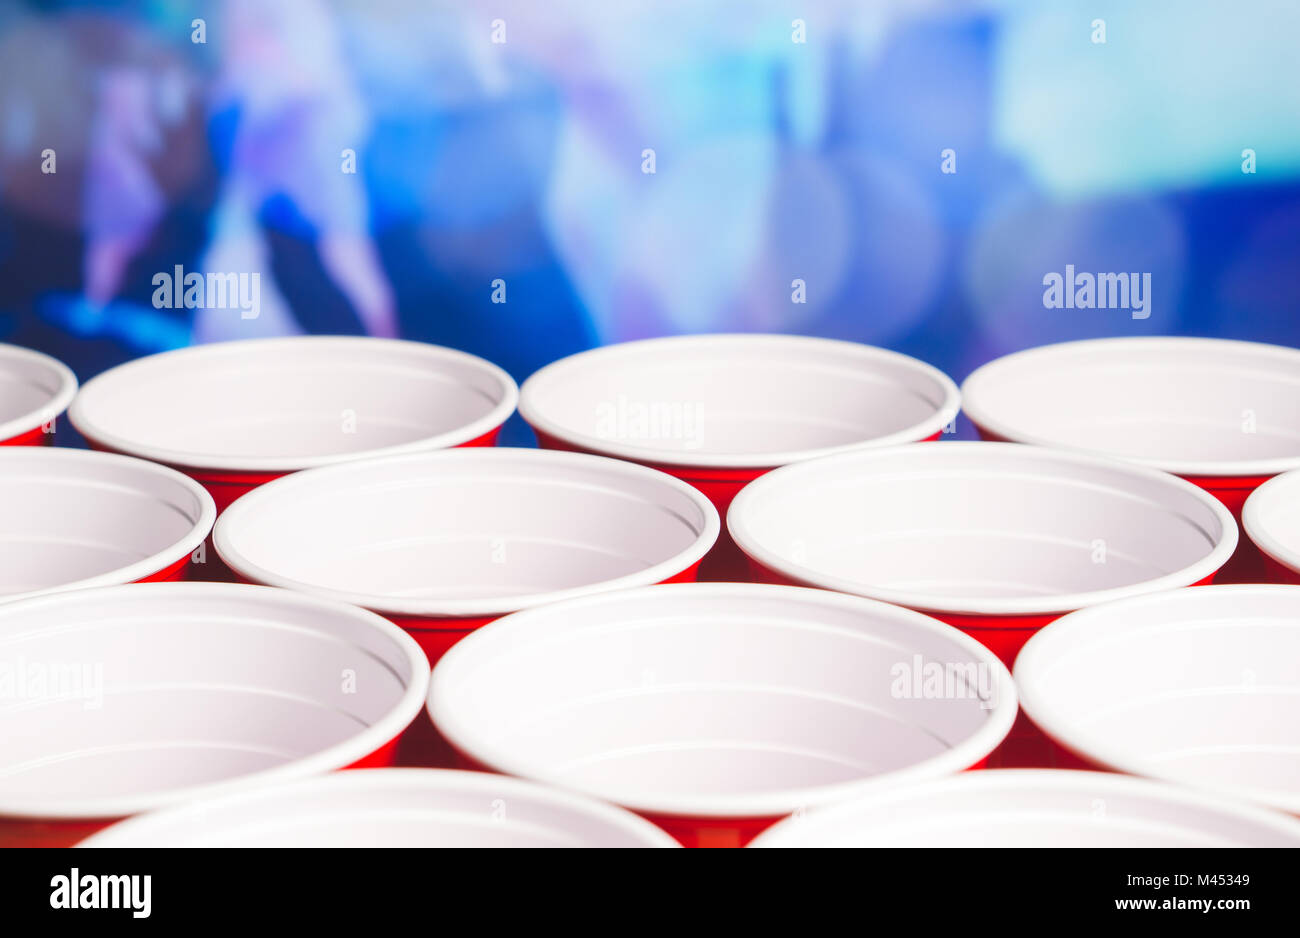 Many red party cups with blurred celebrating people in the background. Low angle close up of college alcohol containers. Marketing and promotion. Stock Photo